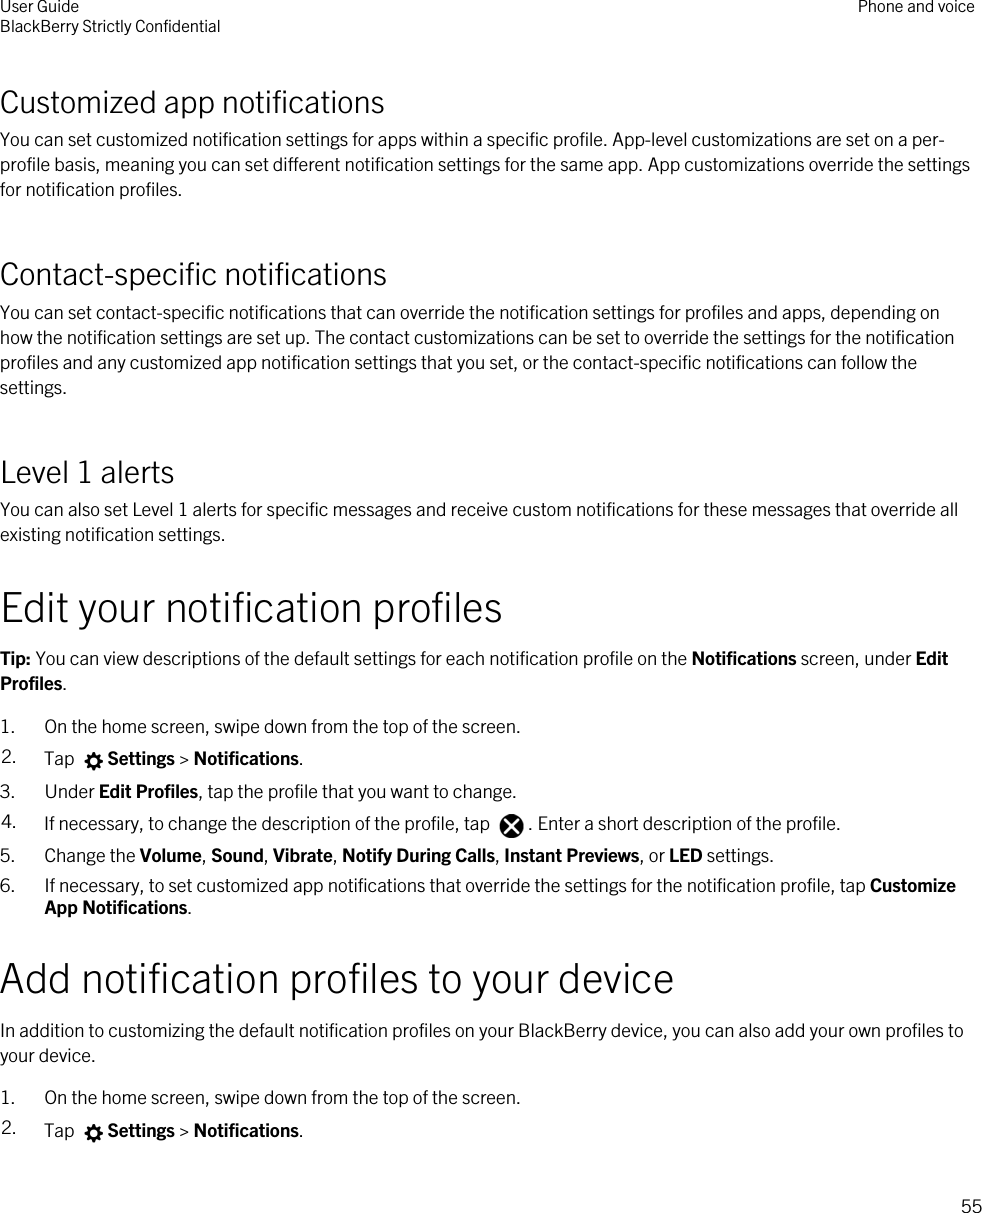 Customized app notificationsYou can set customized notification settings for apps within a specific profile. App-level customizations are set on a per-profile basis, meaning you can set different notification settings for the same app. App customizations override the settings for notification profiles.Contact-specific notificationsYou can set contact-specific notifications that can override the notification settings for profiles and apps, depending on how the notification settings are set up. The contact customizations can be set to override the settings for the notification profiles and any customized app notification settings that you set, or the contact-specific notifications can follow the settings.Level 1 alertsYou can also set Level 1 alerts for specific messages and receive custom notifications for these messages that override all existing notification settings.Edit your notification profilesTip: You can view descriptions of the default settings for each notification profile on the Notifications screen, under Edit Profiles.1. On the home screen, swipe down from the top of the screen.2. Tap  Settings &gt; Notifications.3. Under Edit Profiles, tap the profile that you want to change.4. If necessary, to change the description of the profile, tap  . Enter a short description of the profile.5. Change the Volume, Sound, Vibrate, Notify During Calls, Instant Previews, or LED settings.6. If necessary, to set customized app notifications that override the settings for the notification profile, tap Customize App Notifications.Add notification profiles to your deviceIn addition to customizing the default notification profiles on your BlackBerry device, you can also add your own profiles to your device.1. On the home screen, swipe down from the top of the screen.2. Tap  Settings &gt; Notifications.User GuideBlackBerry Strictly Confidential Phone and voice55